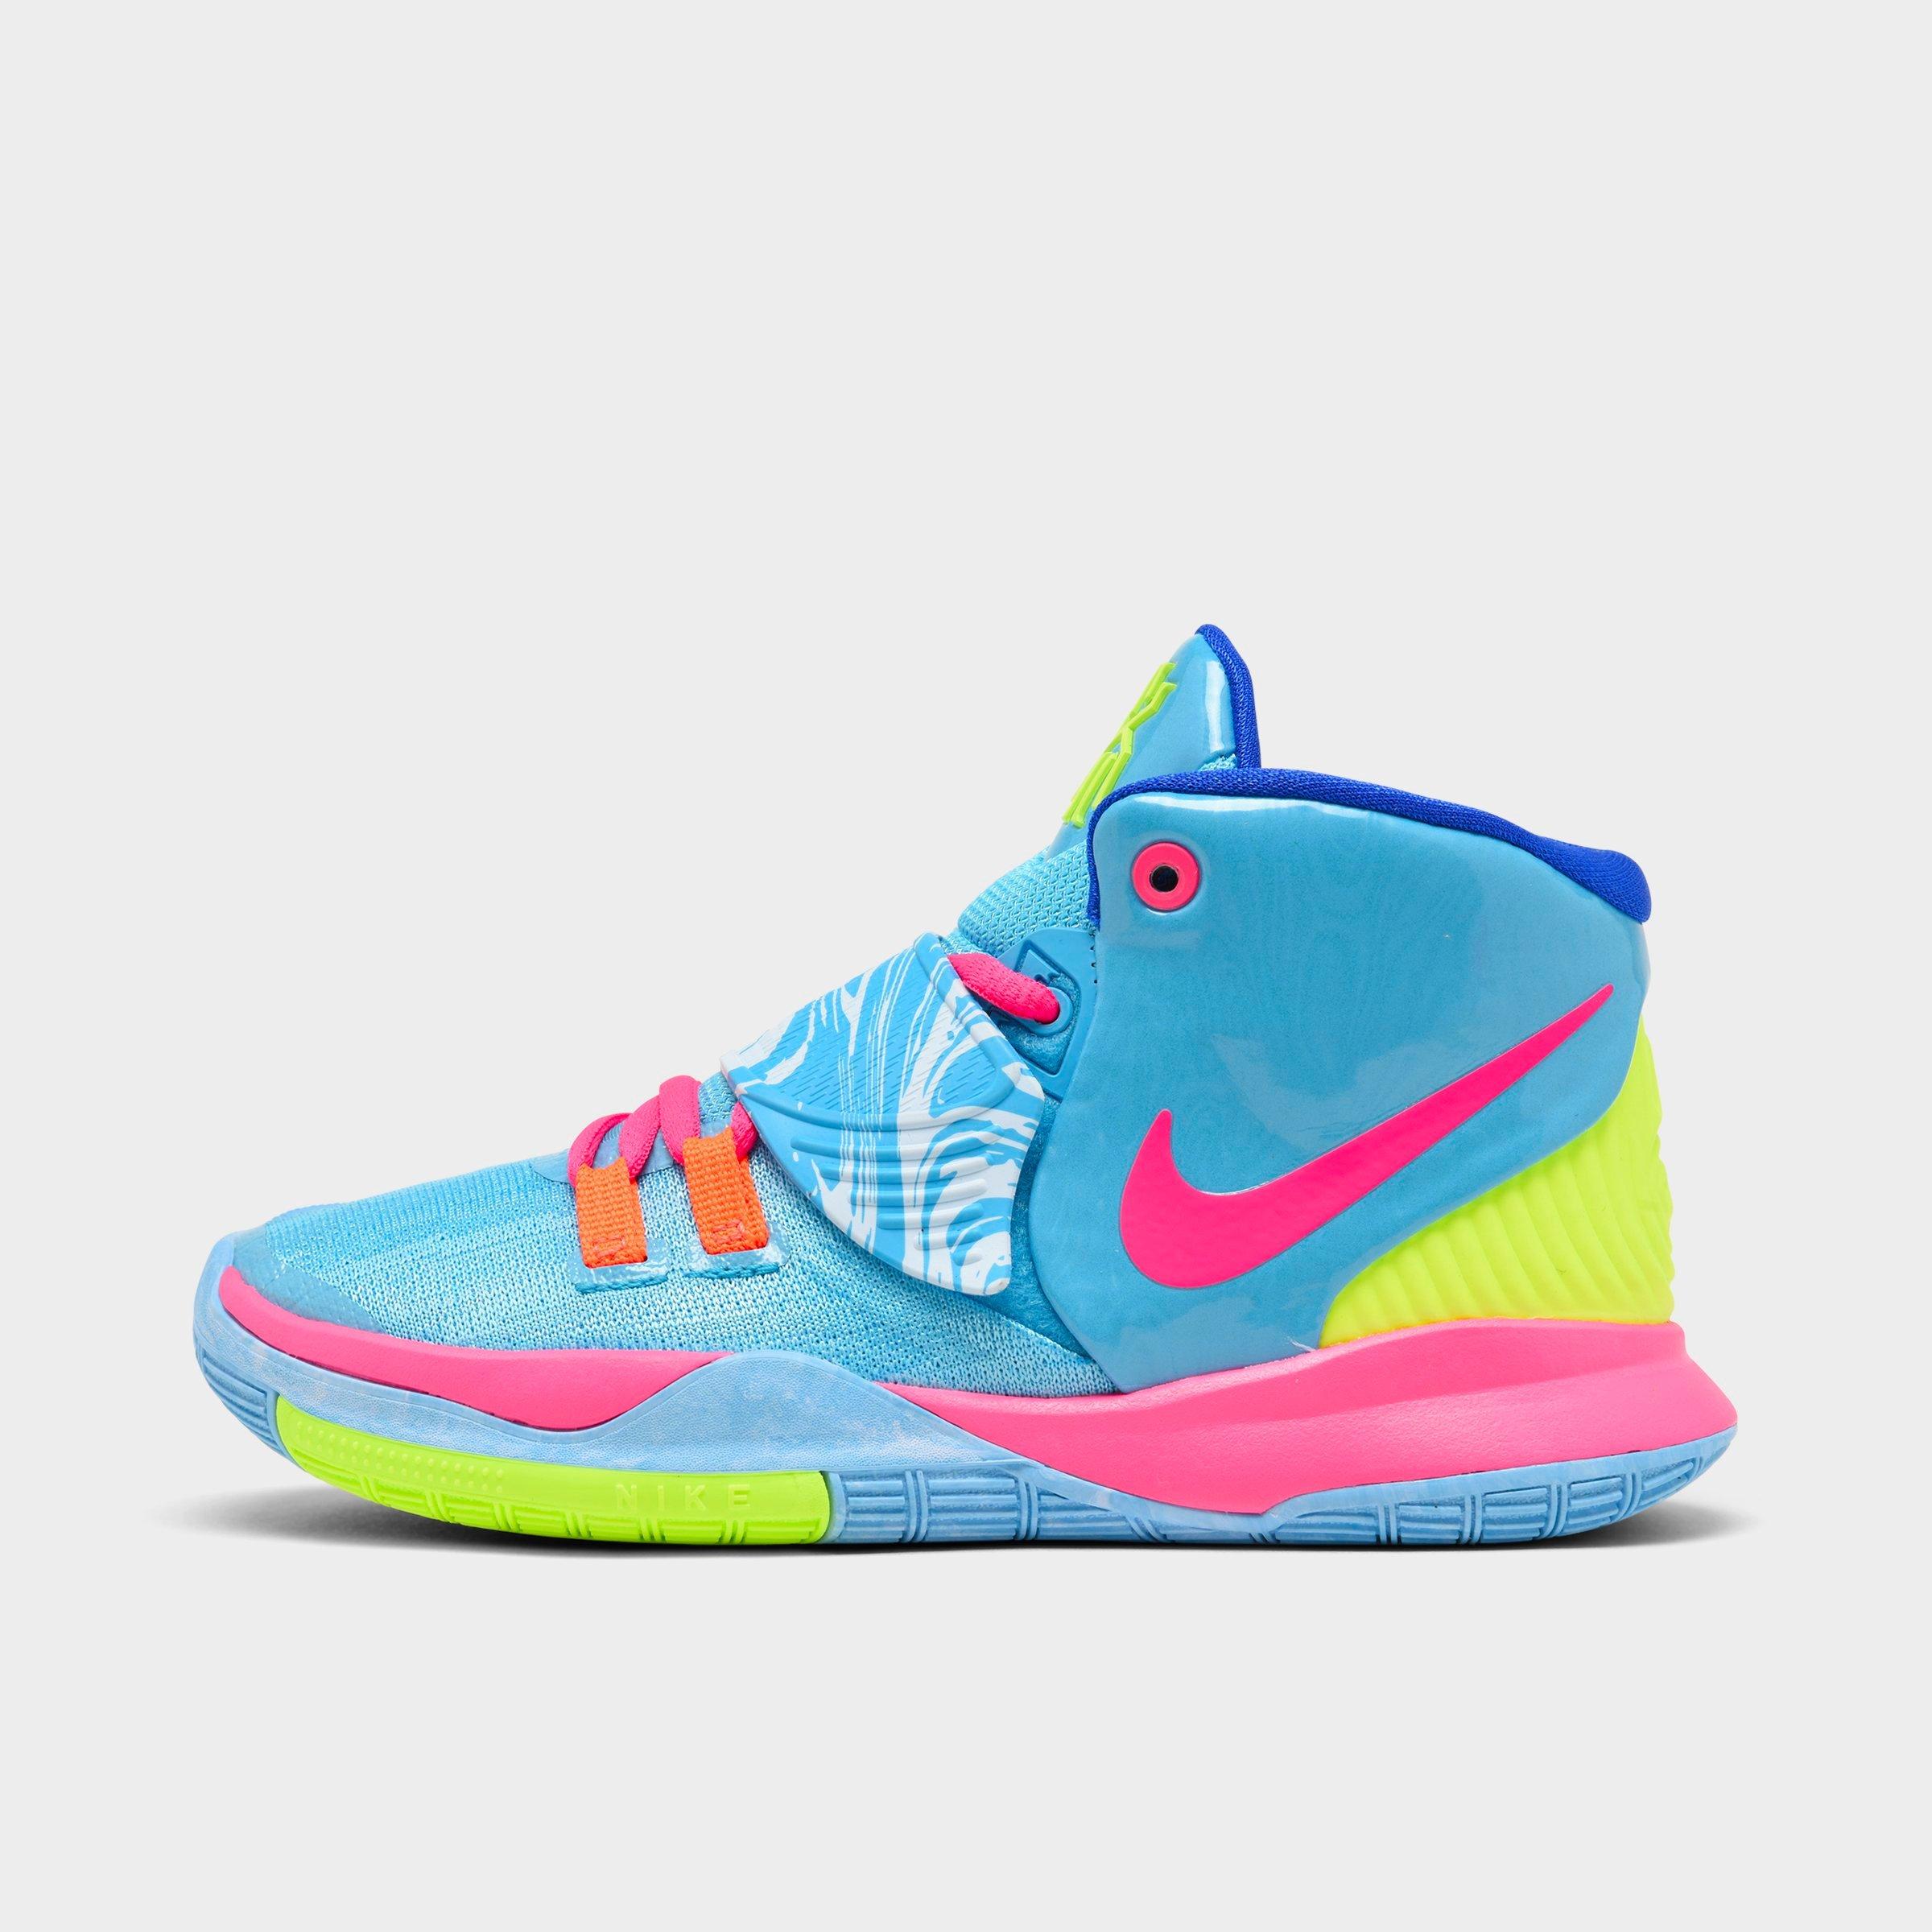 kyrie 6 basketball shoes youth